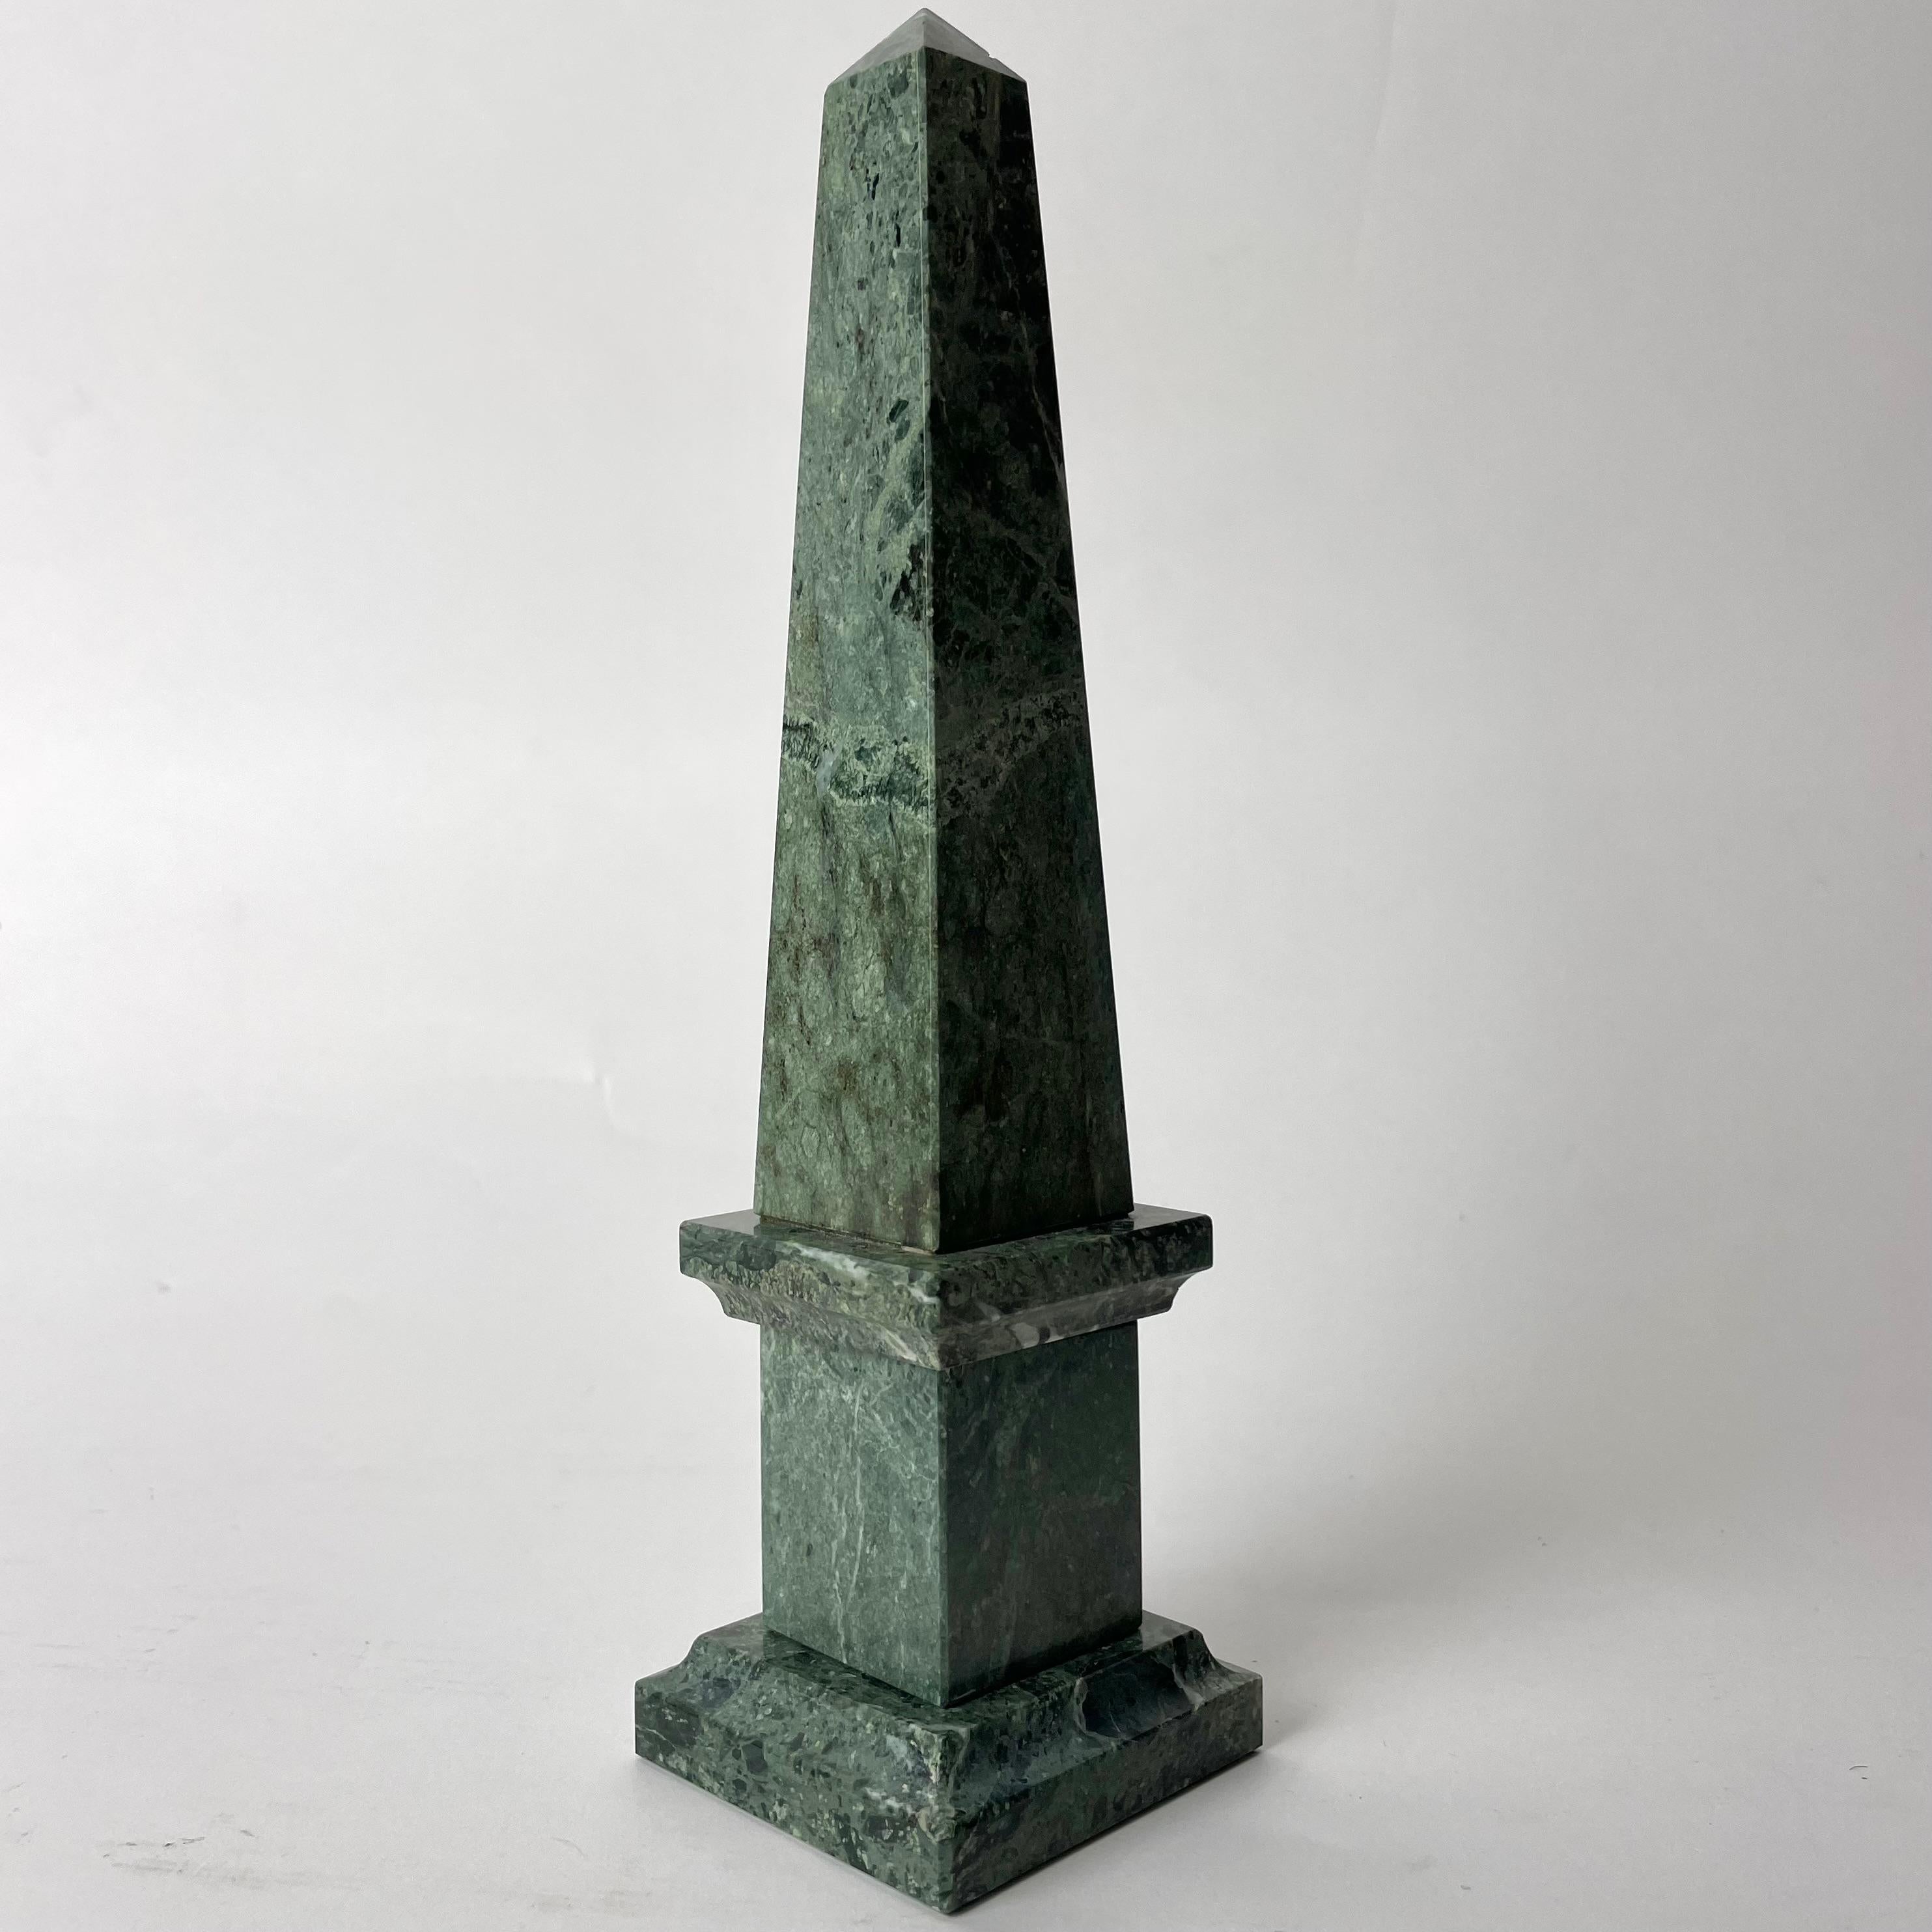 Refined Marble Obelisk, 20th Century

An obelisk made of solid and beautiful Green Marble. Exquisite form which is enhanced by the exclusivity of the material.

Wear consistent with age and use.